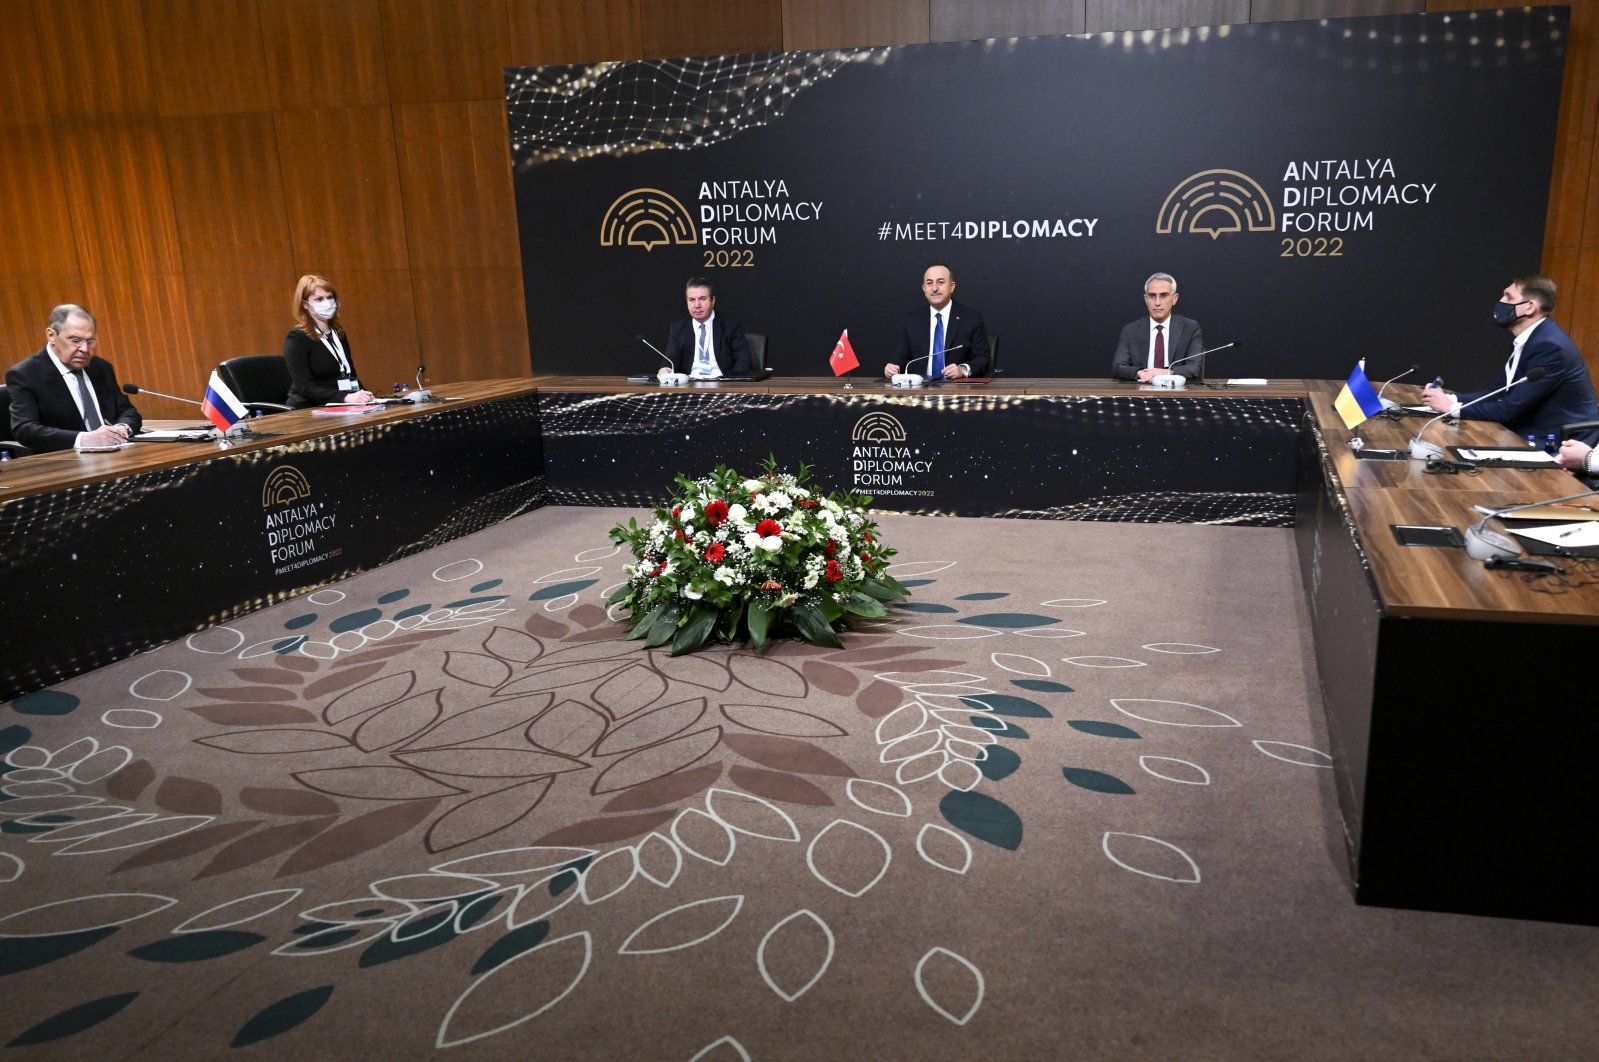 Foreign Minister Mevlüt Çavuşoğlu (C) chairs a tripartite meeting with Russia&#039;s Foreign Minister Sergey Lavrov (L) and Ukraine&#039;s Foreign Minister Dmytro Kuleba (R) in Antalya, southern Turkey, March 10, 2022. (Russian Foreign Ministry Press Service via AP)